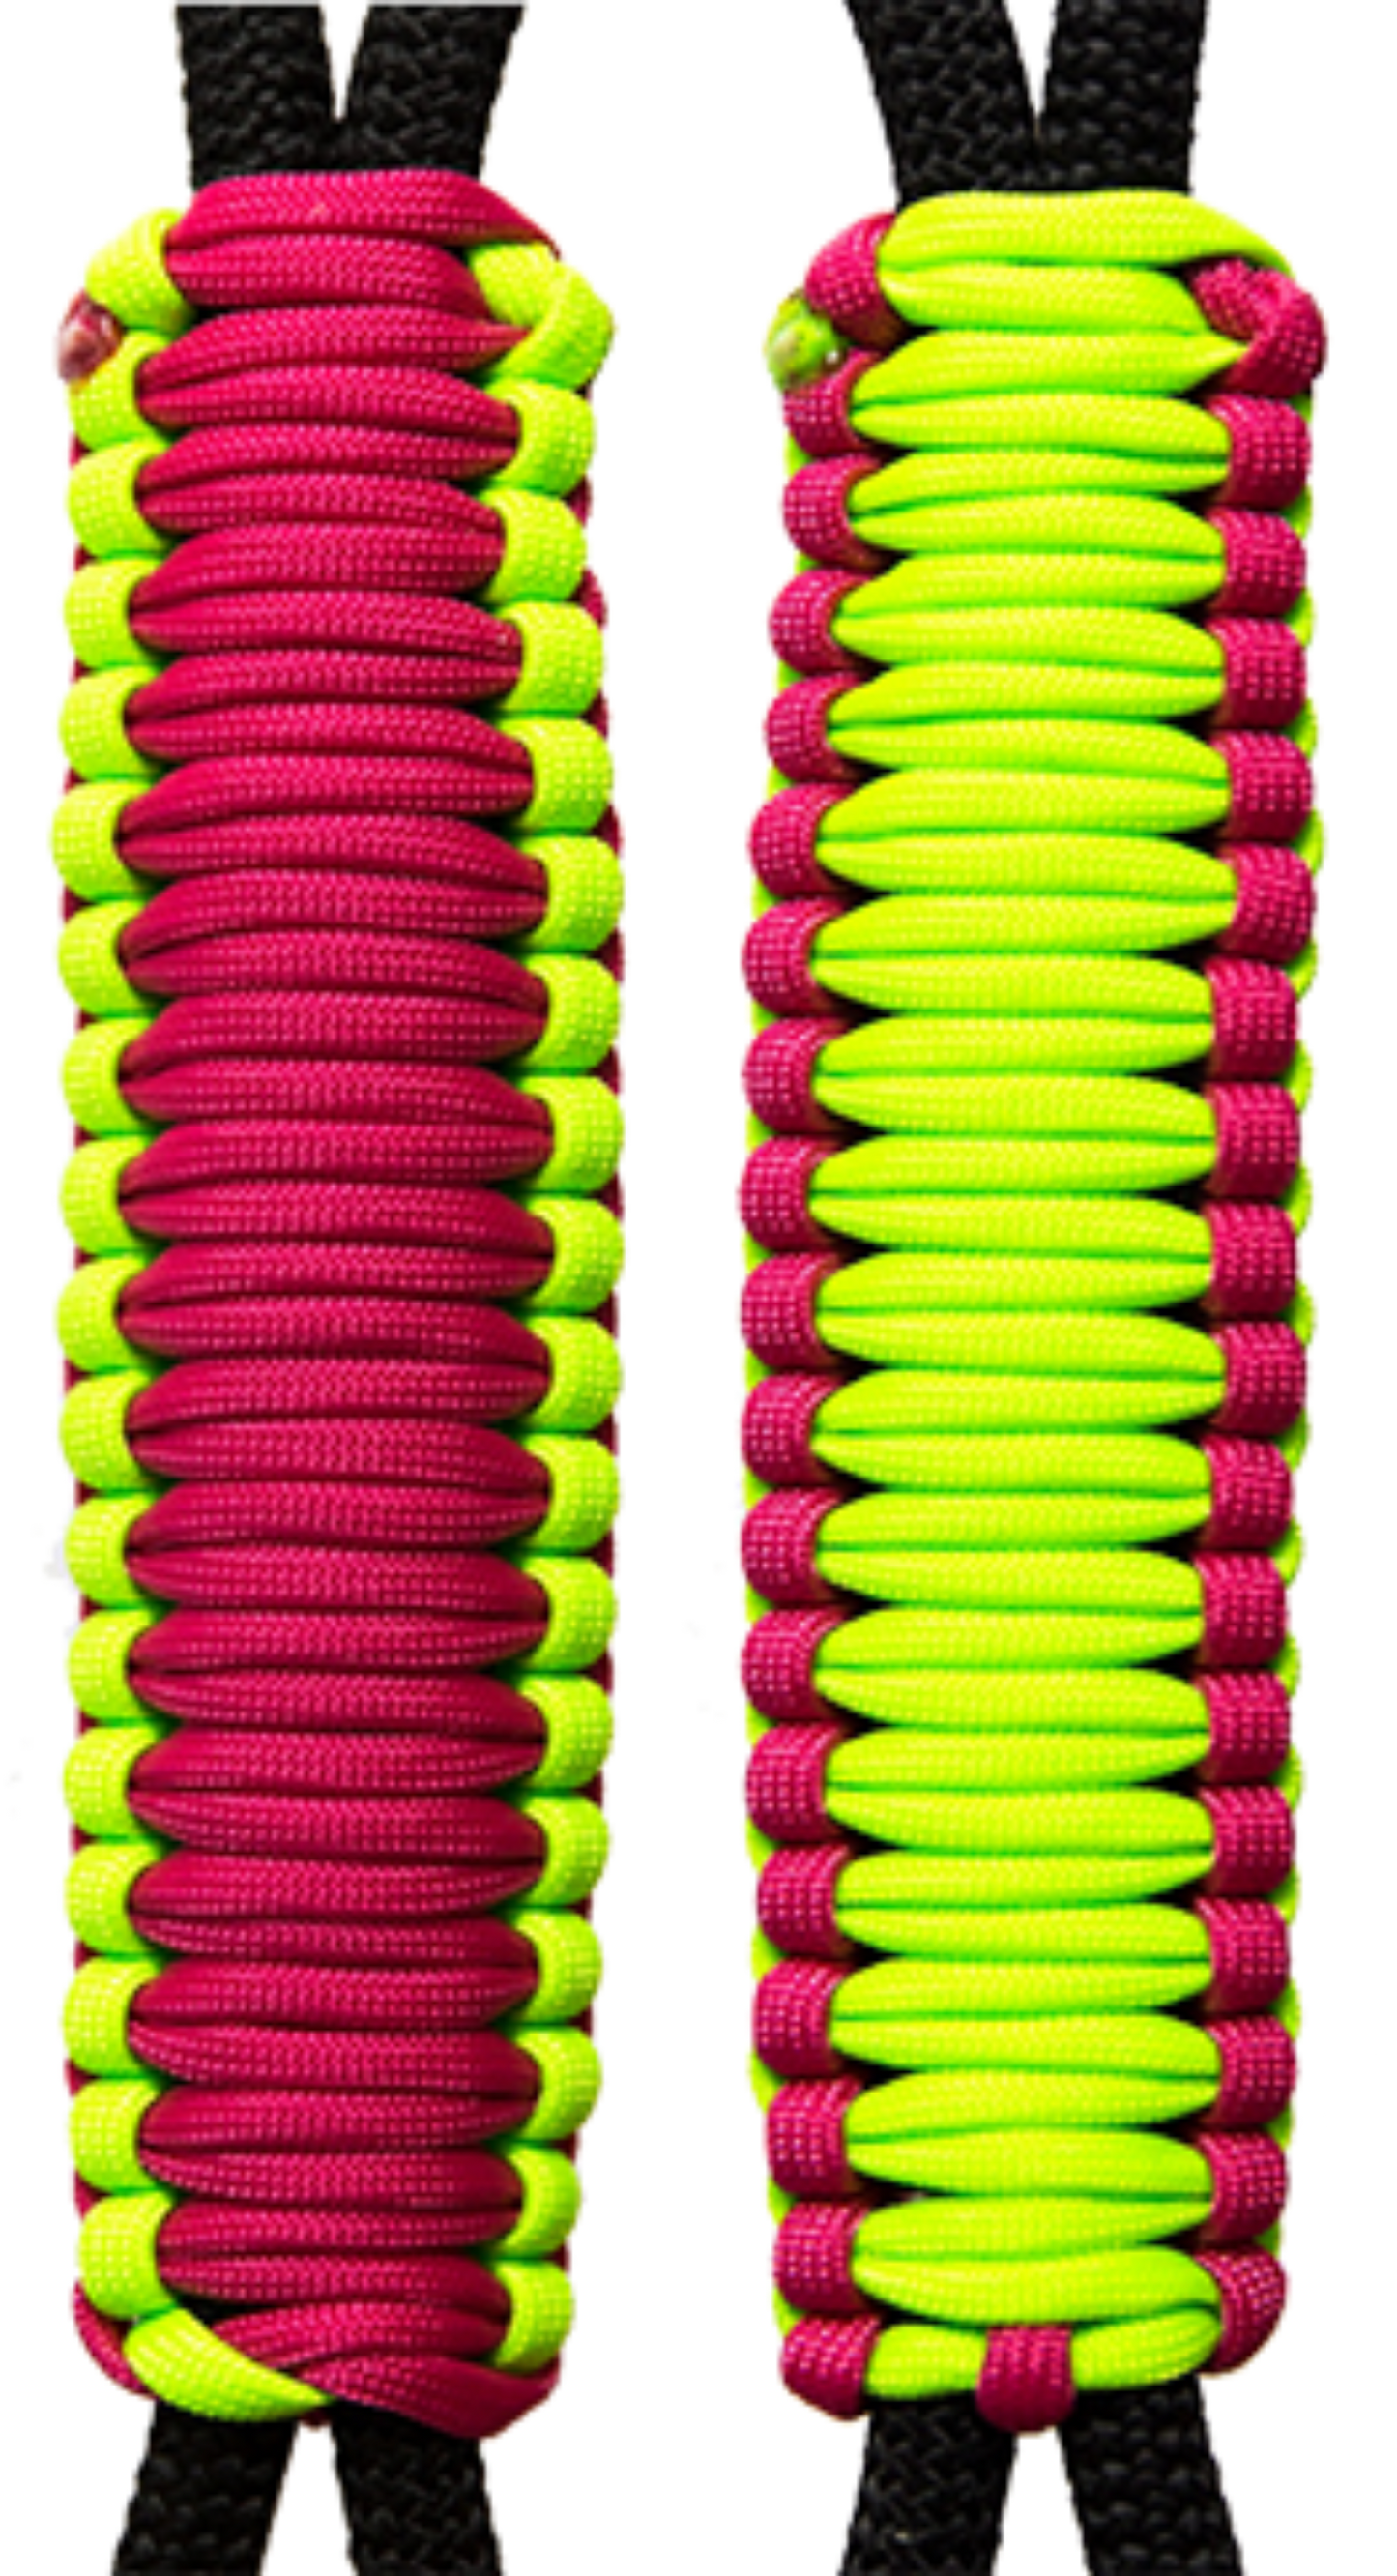 Fuchsia & Neon Green  C010C023 - Paracord Handmade Handles for Stainless Steel Tumblers - Made in USA!